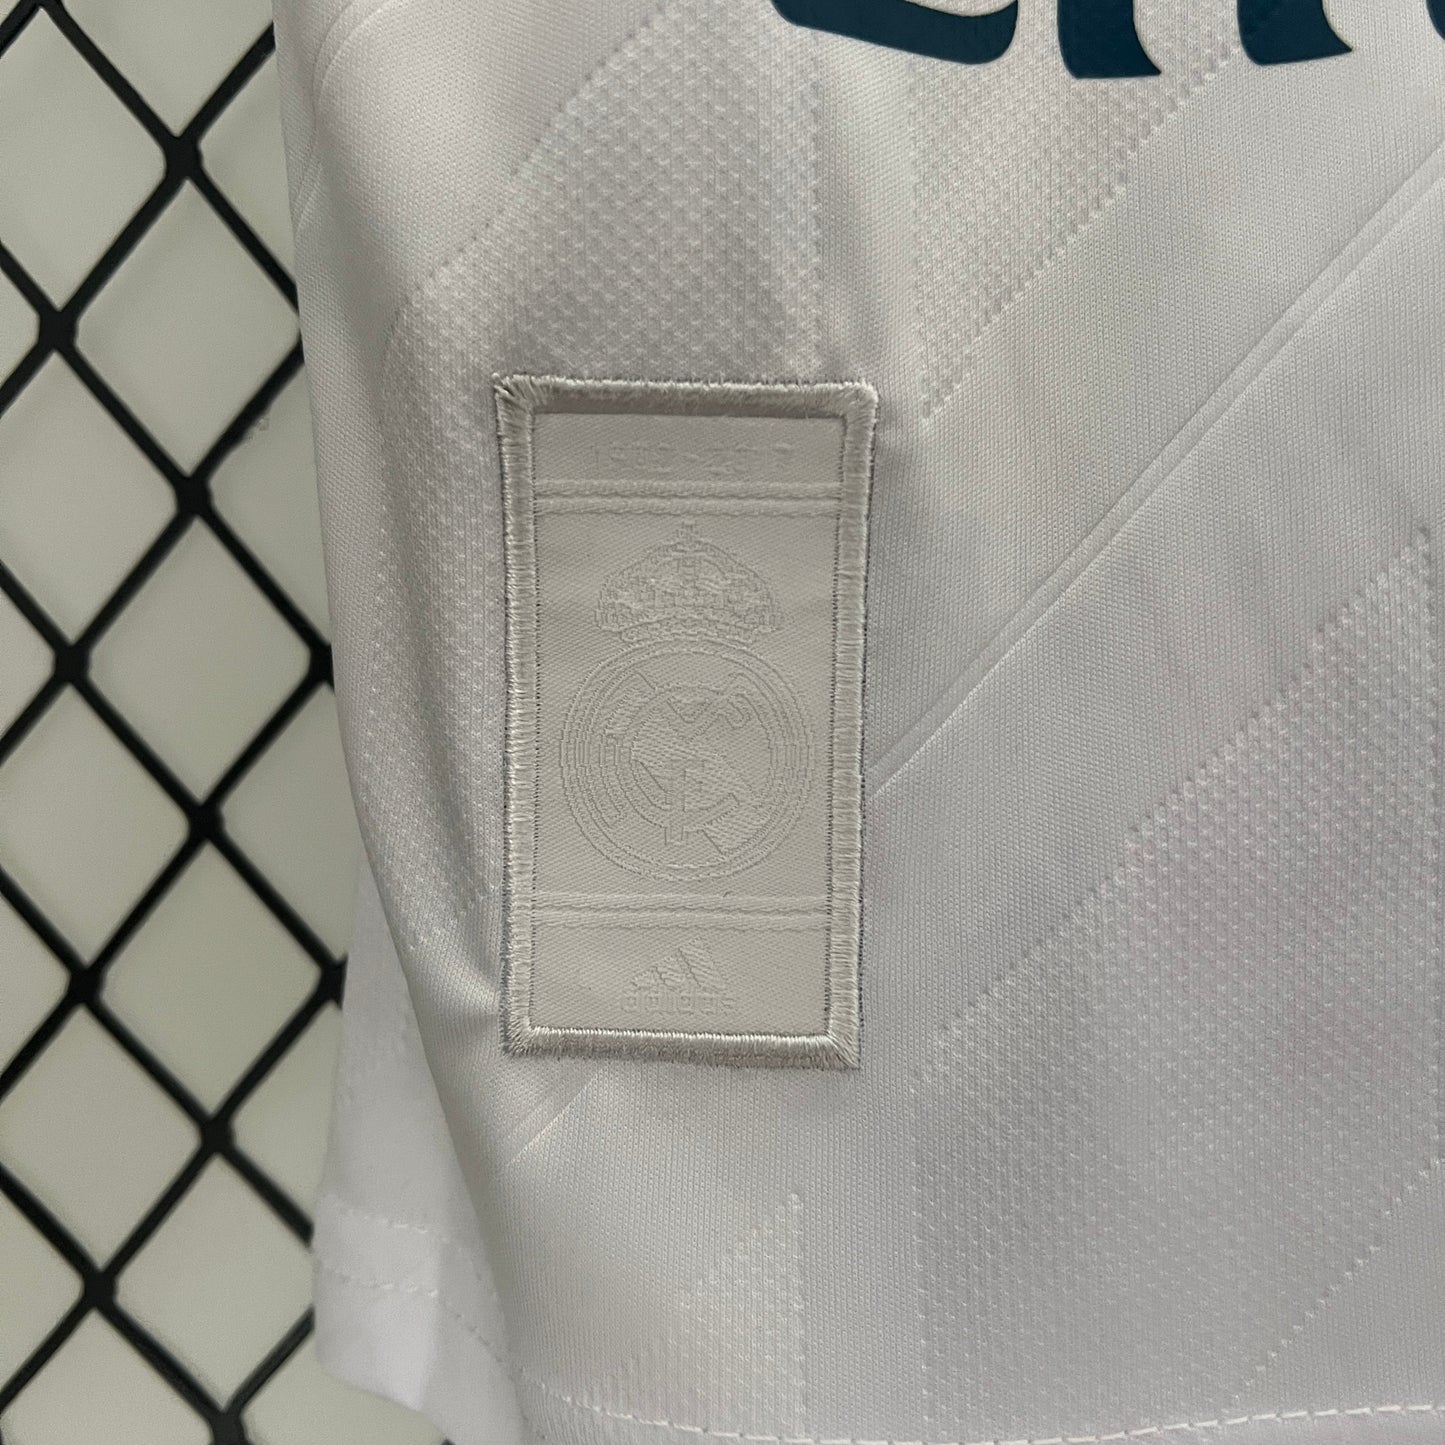 REAL MADRID 2017 - 2018 HOME JERSEY FOR CHILDREN